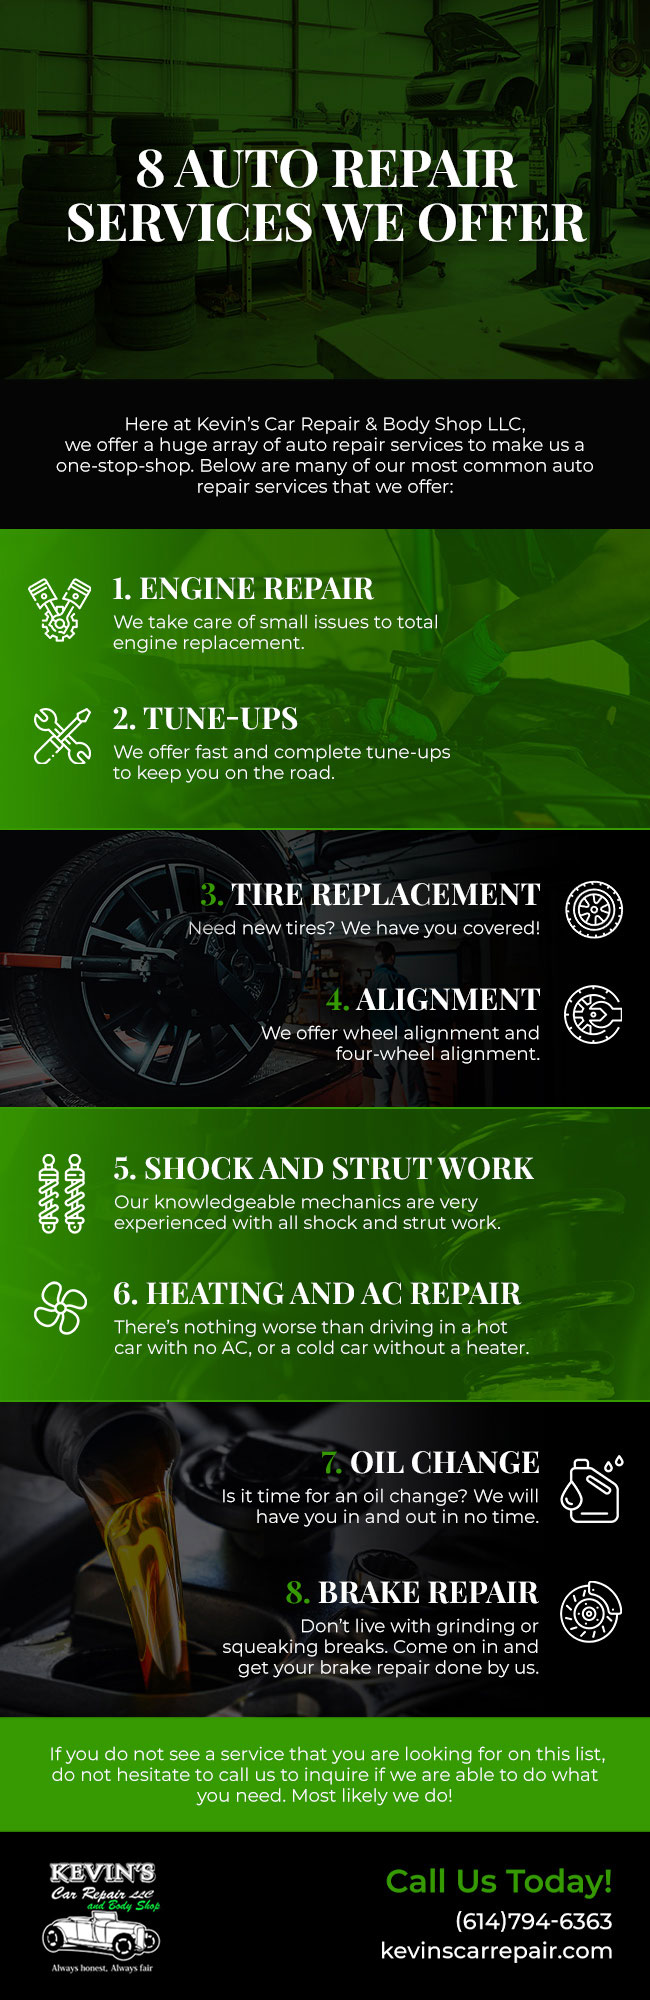 8 Auto Repair Services We Offer